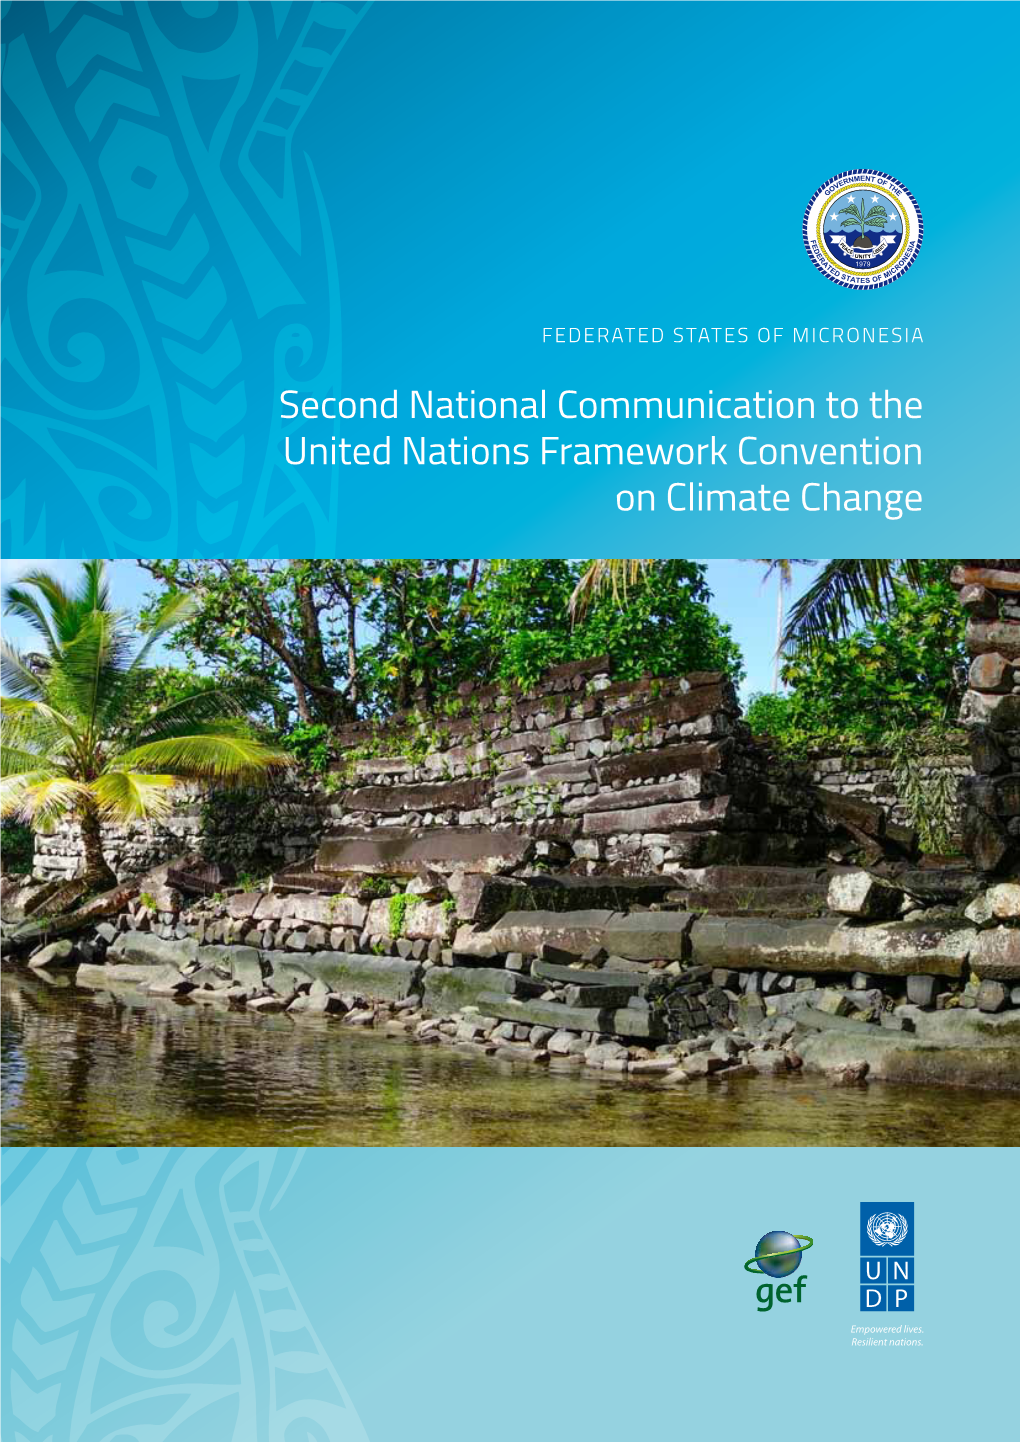 Second National Communication to the United Nations Framework